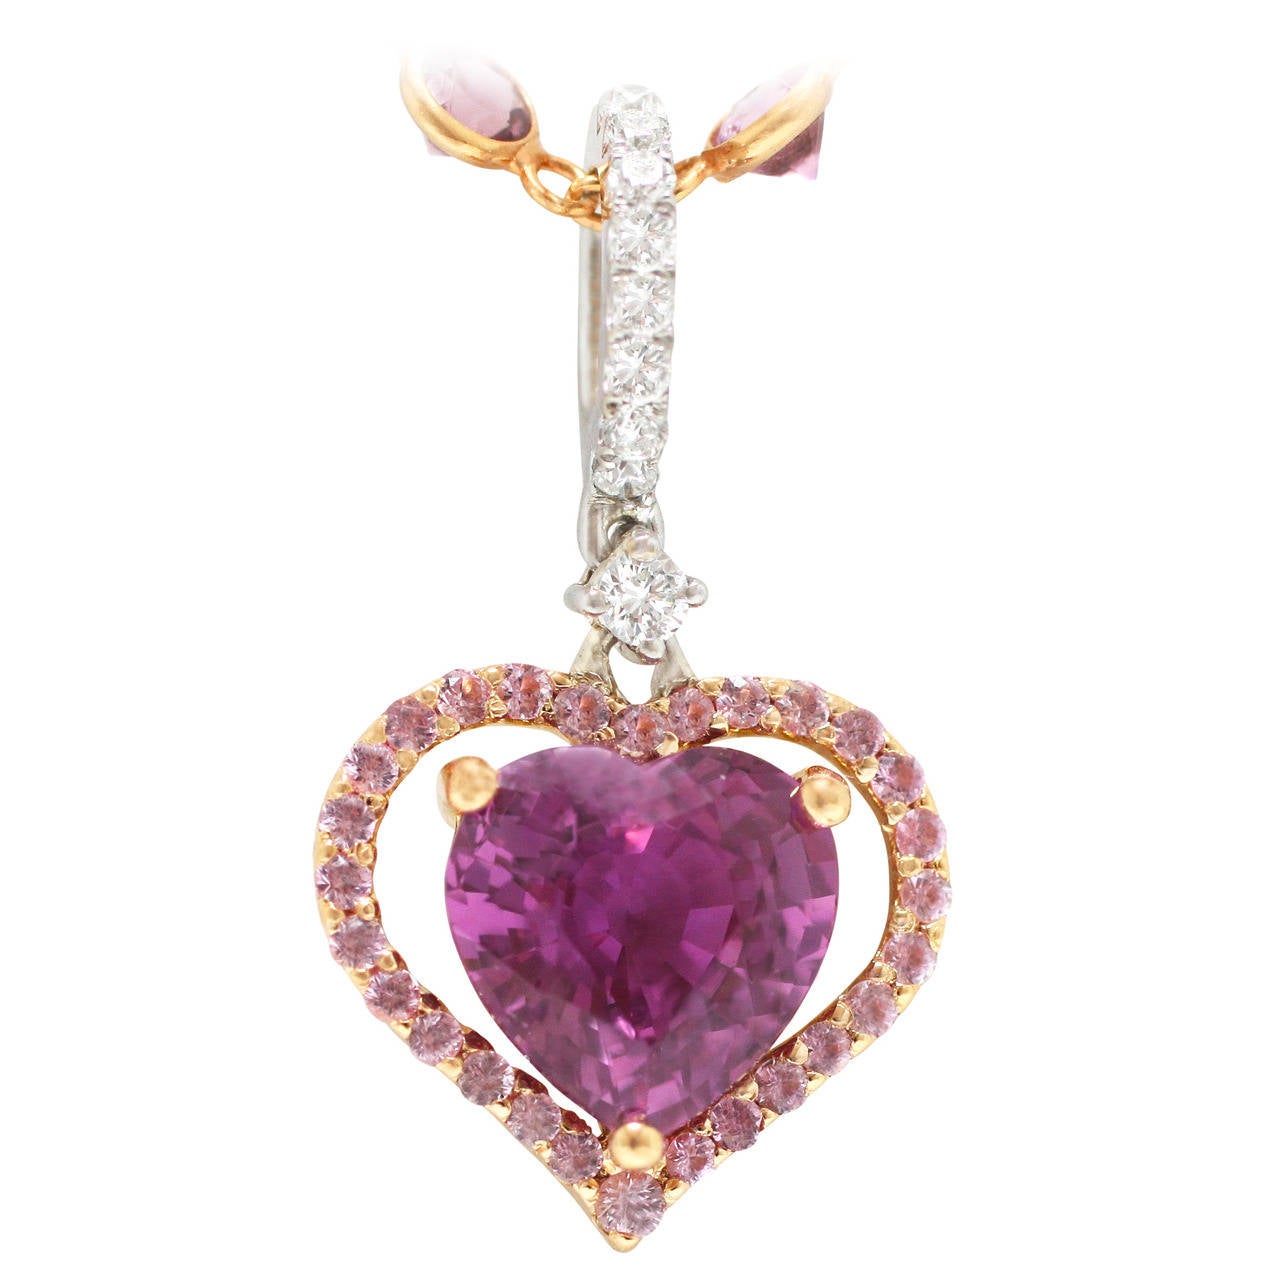 Burdeen's Elegant Pink Sapphire Heart Pendant On A Pink Sapphire Station Chain For Sale